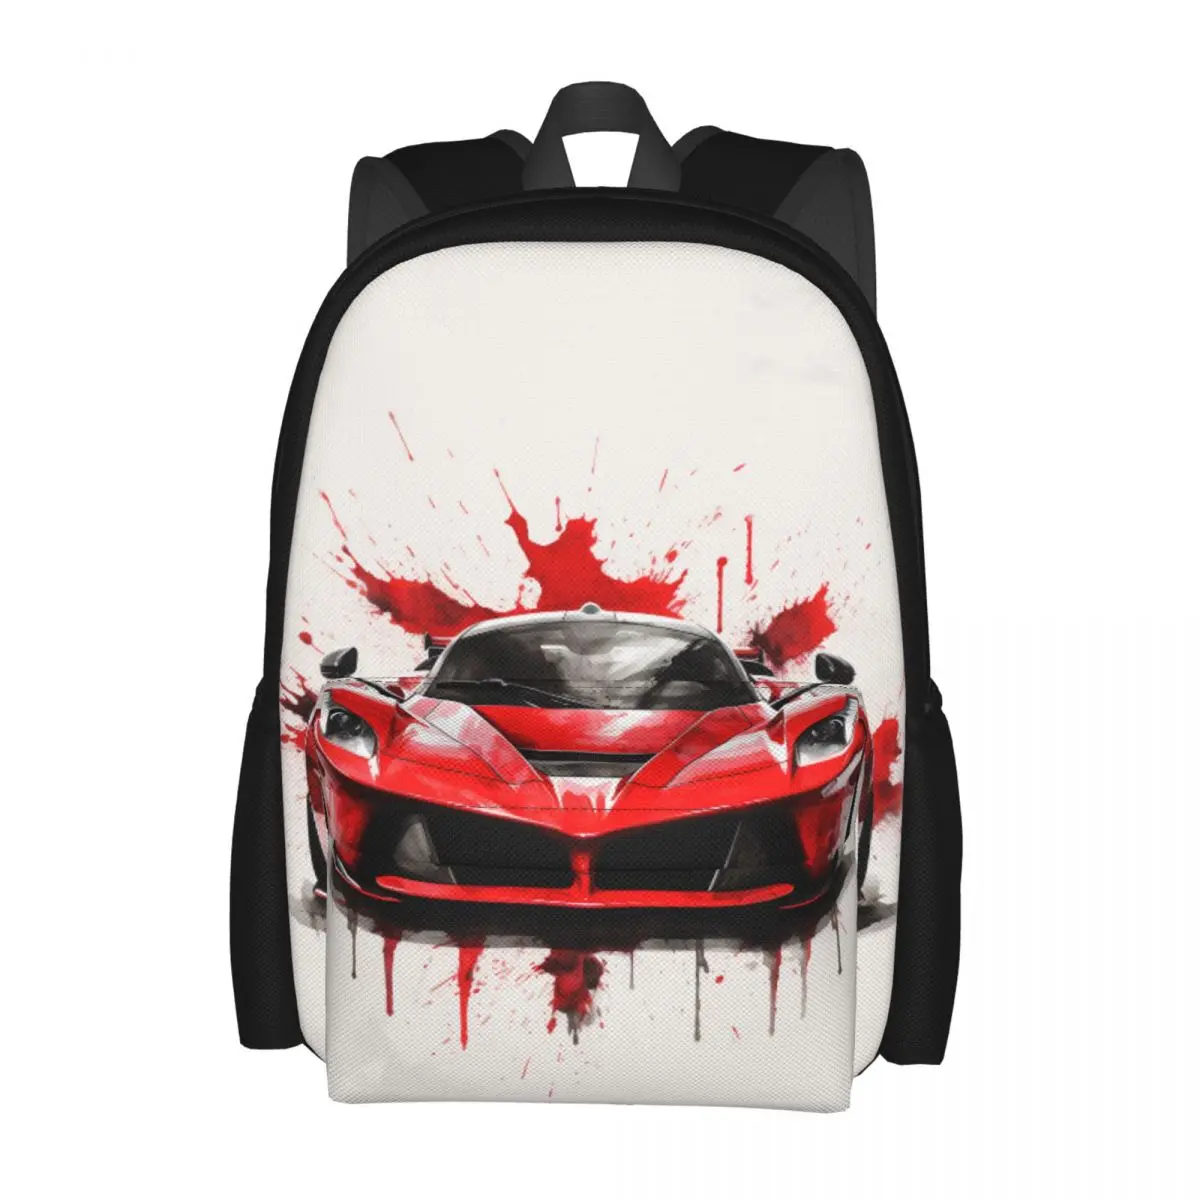 

Passionate Sports Car Backpack Hyper Artistic Ink Drawing Outdoor Backpacks Male Pretty School Bags Design Pattern Rucksack